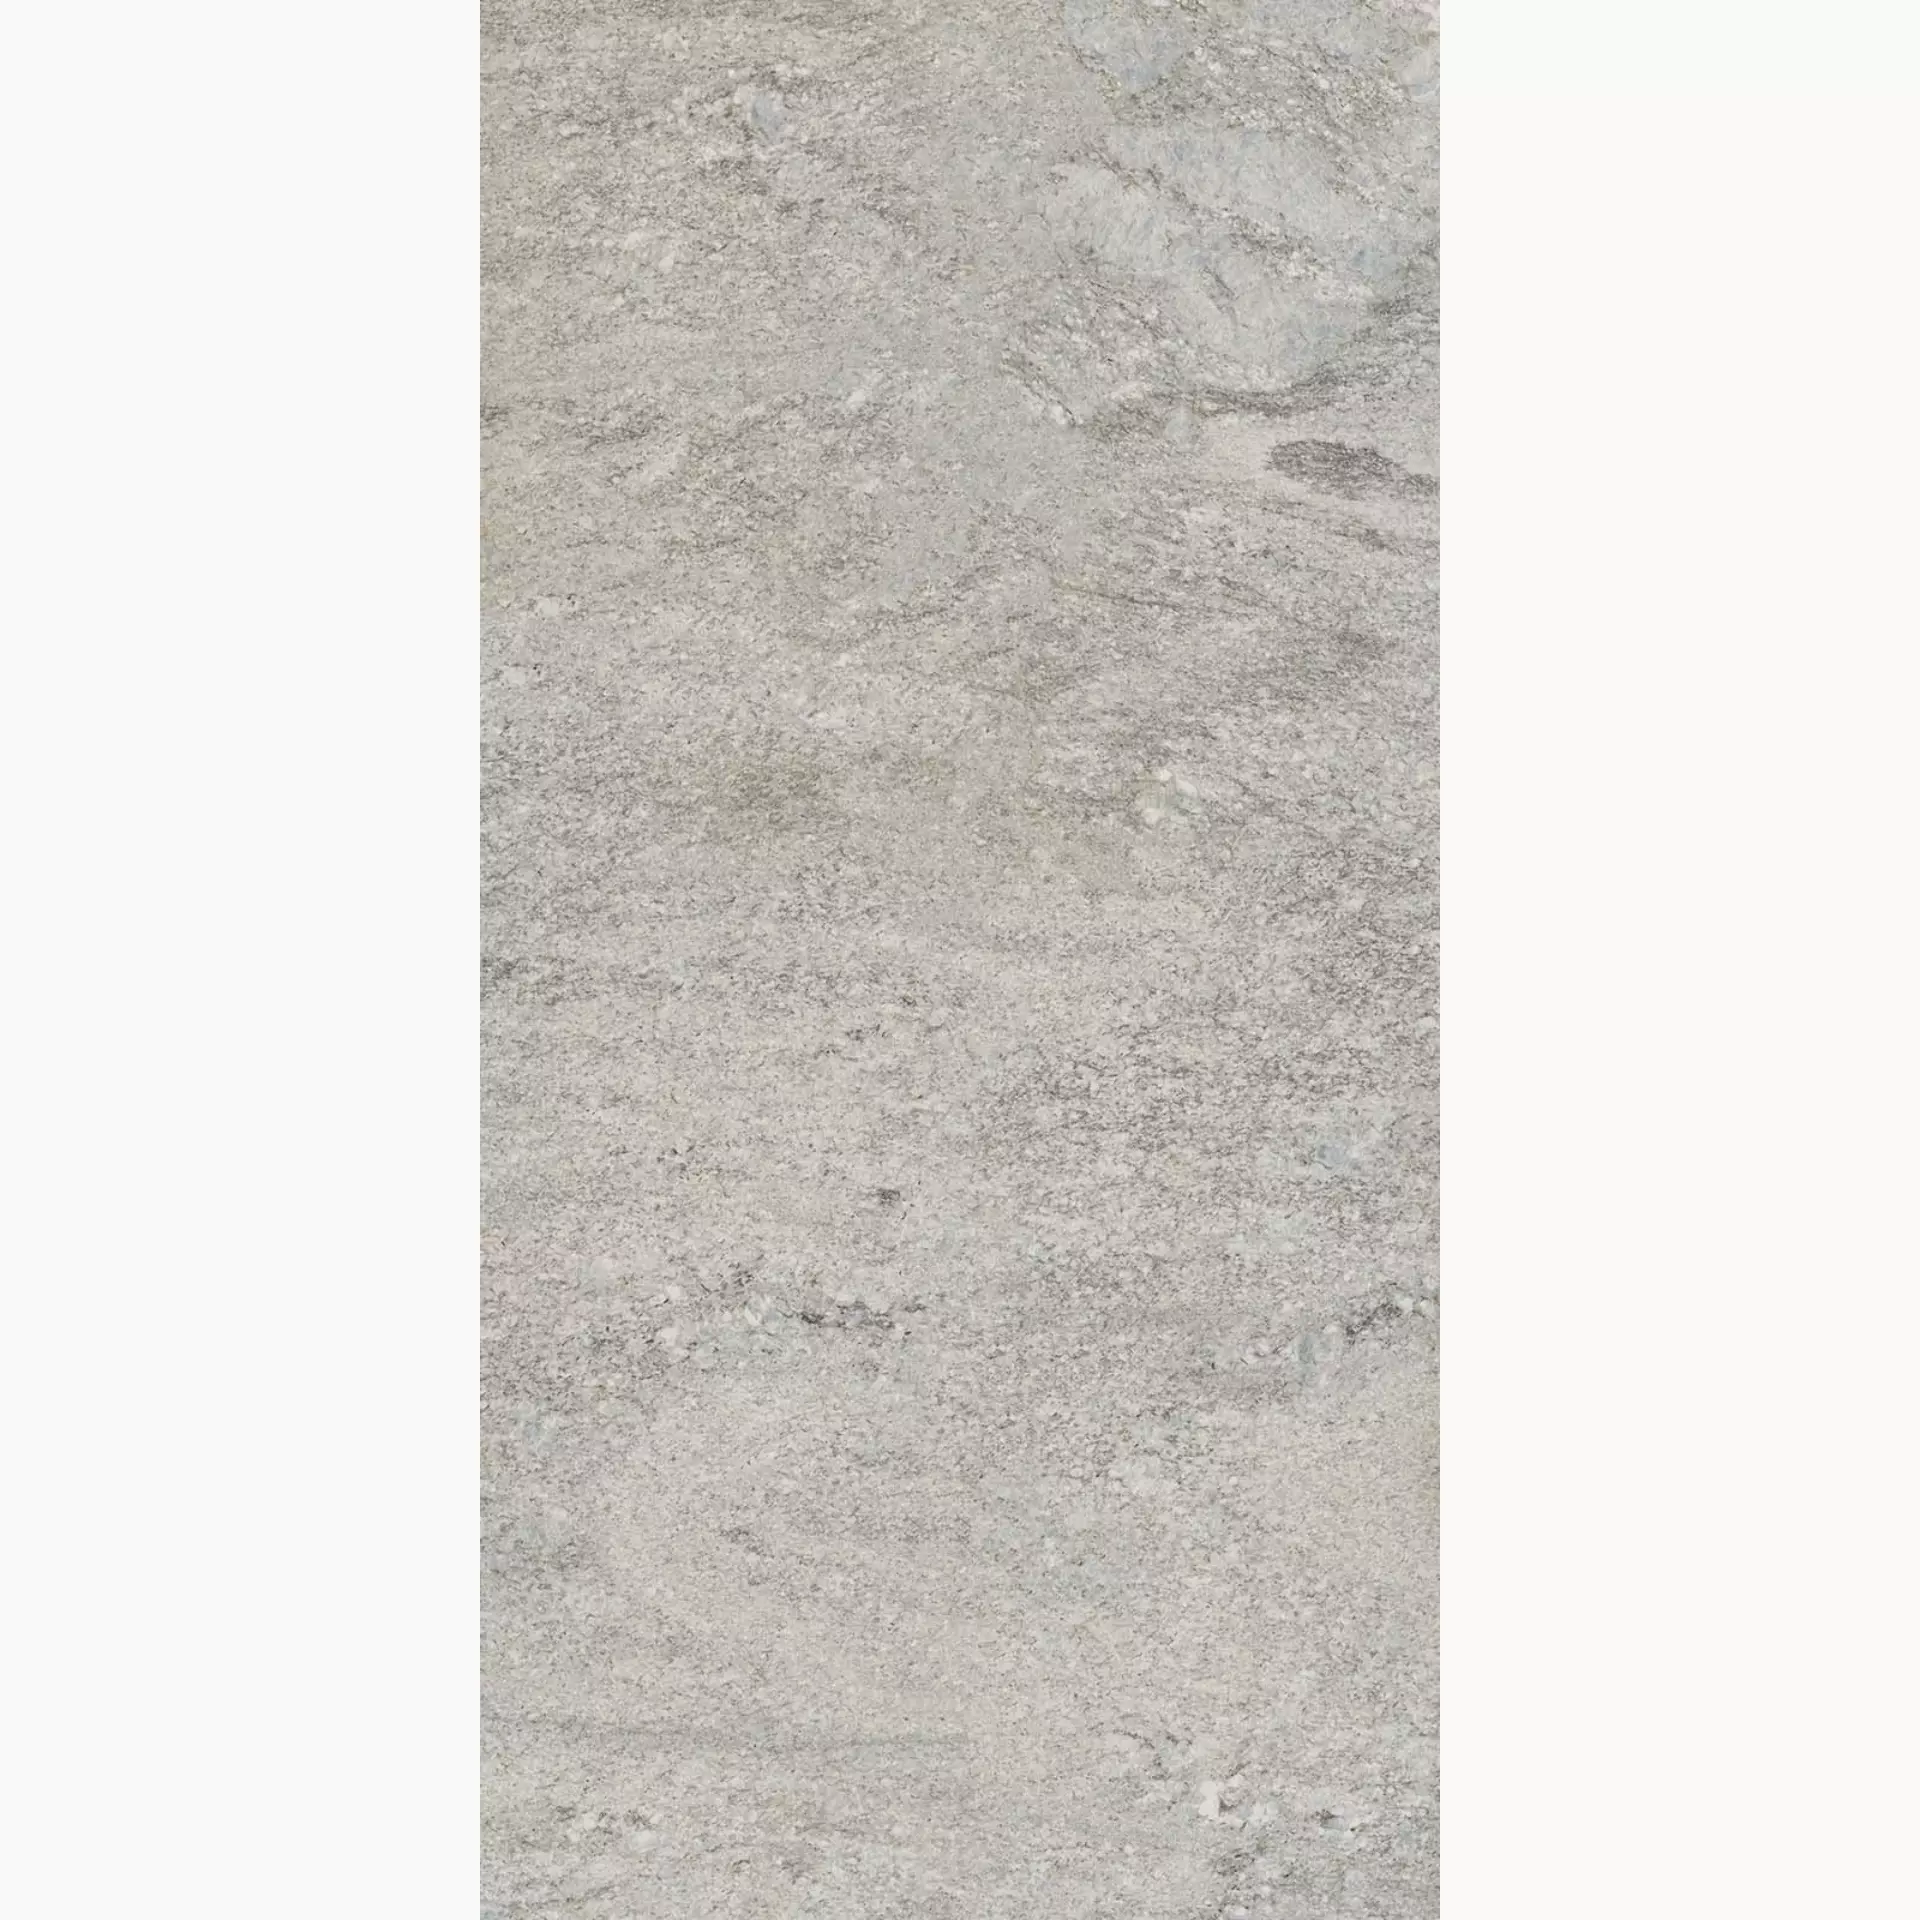 Keope Percorsi Frame Plima Silver Spazzolato 474A3144 60x120cm rectified 9mm